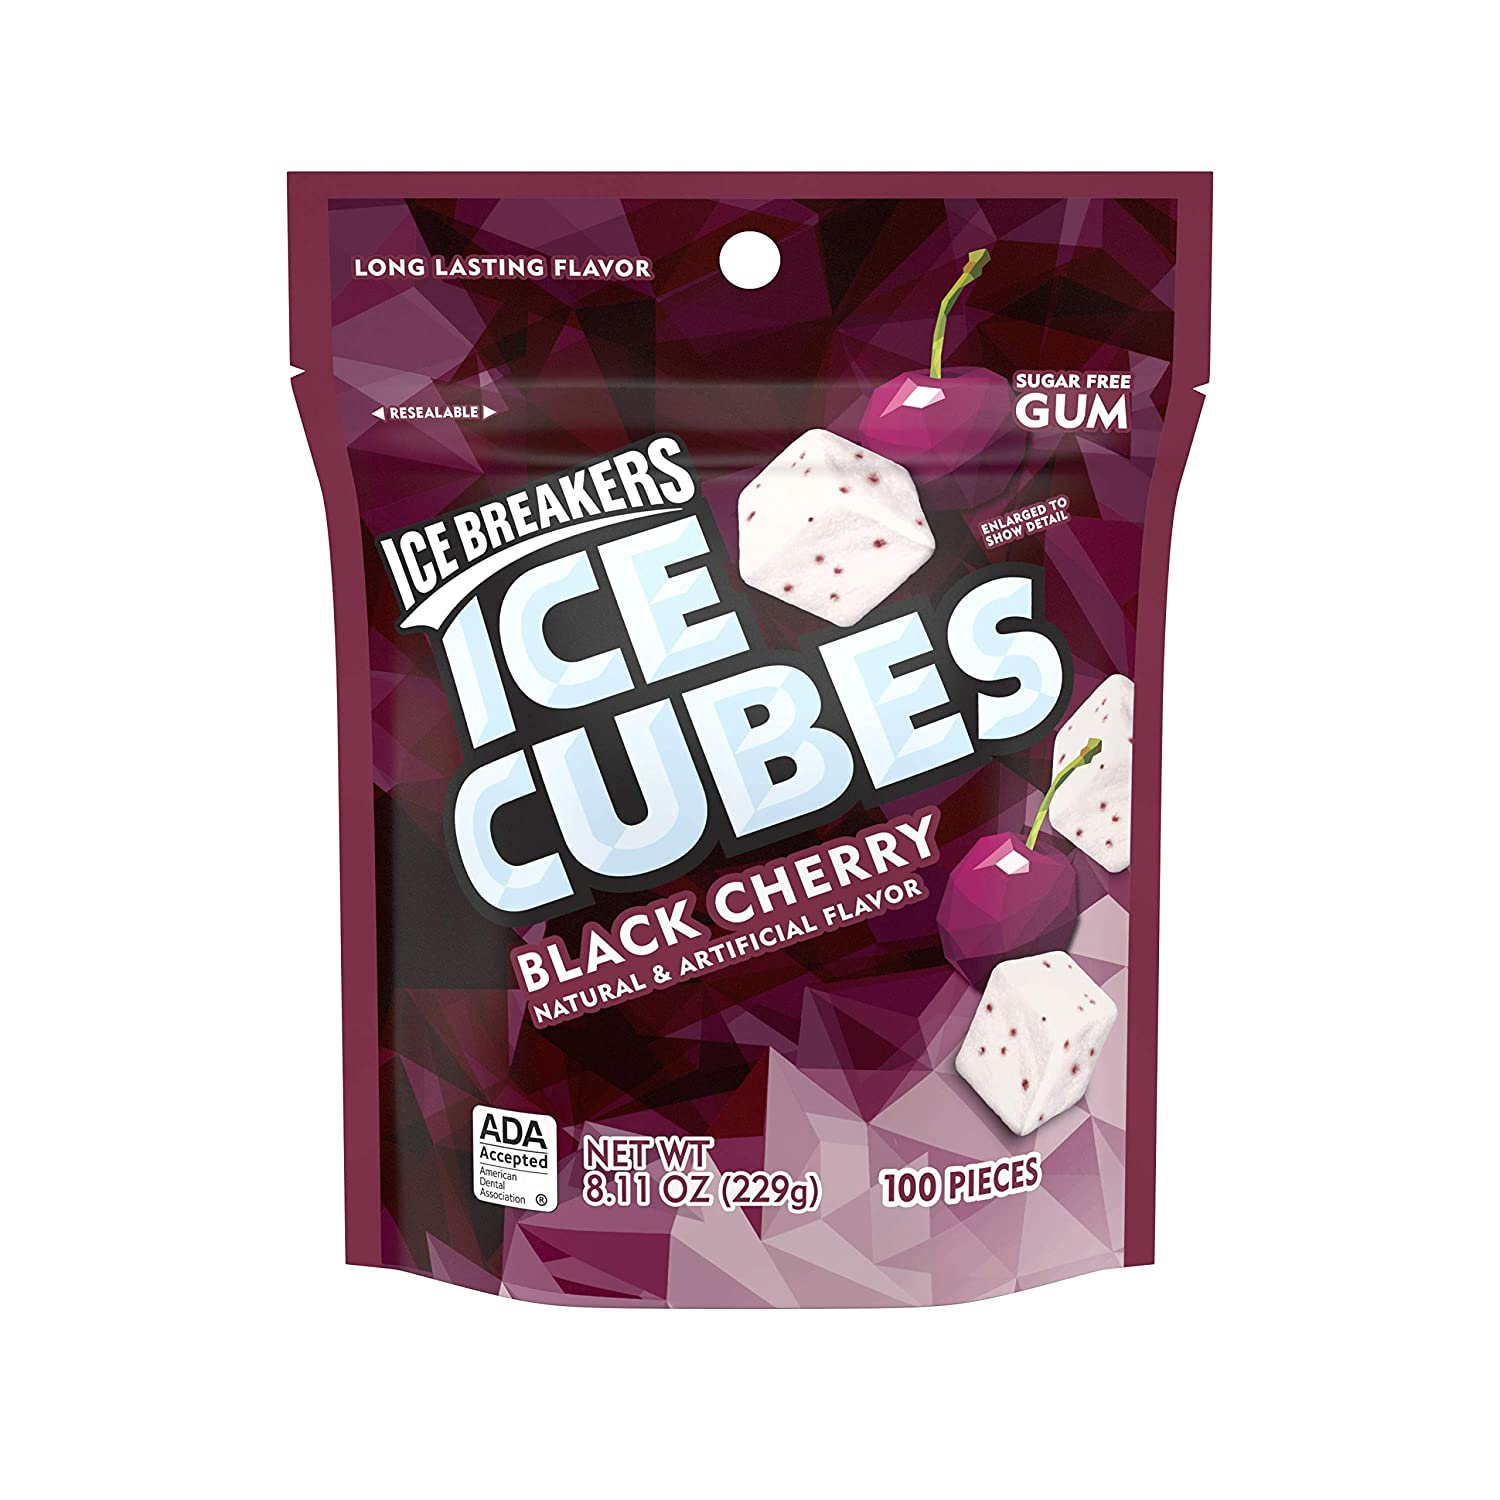 8.11-Oz Ice Breakers Ice Cubes Gum (Black Cherry) $3.12 + Free Shipping w/ Prime or on orders $25+